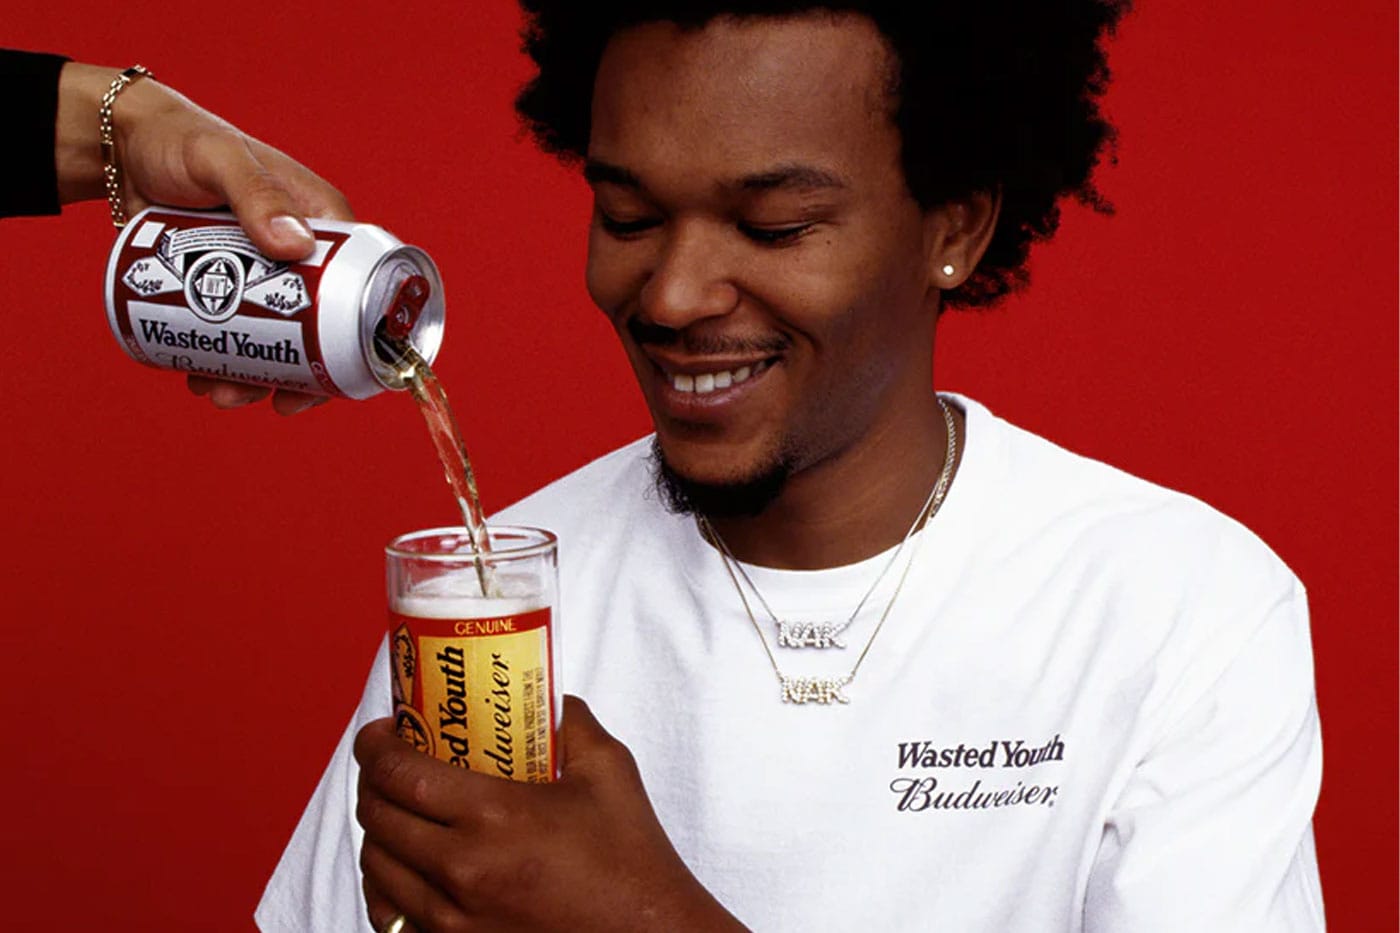 Wasted Youth x Budweiser Tee L-